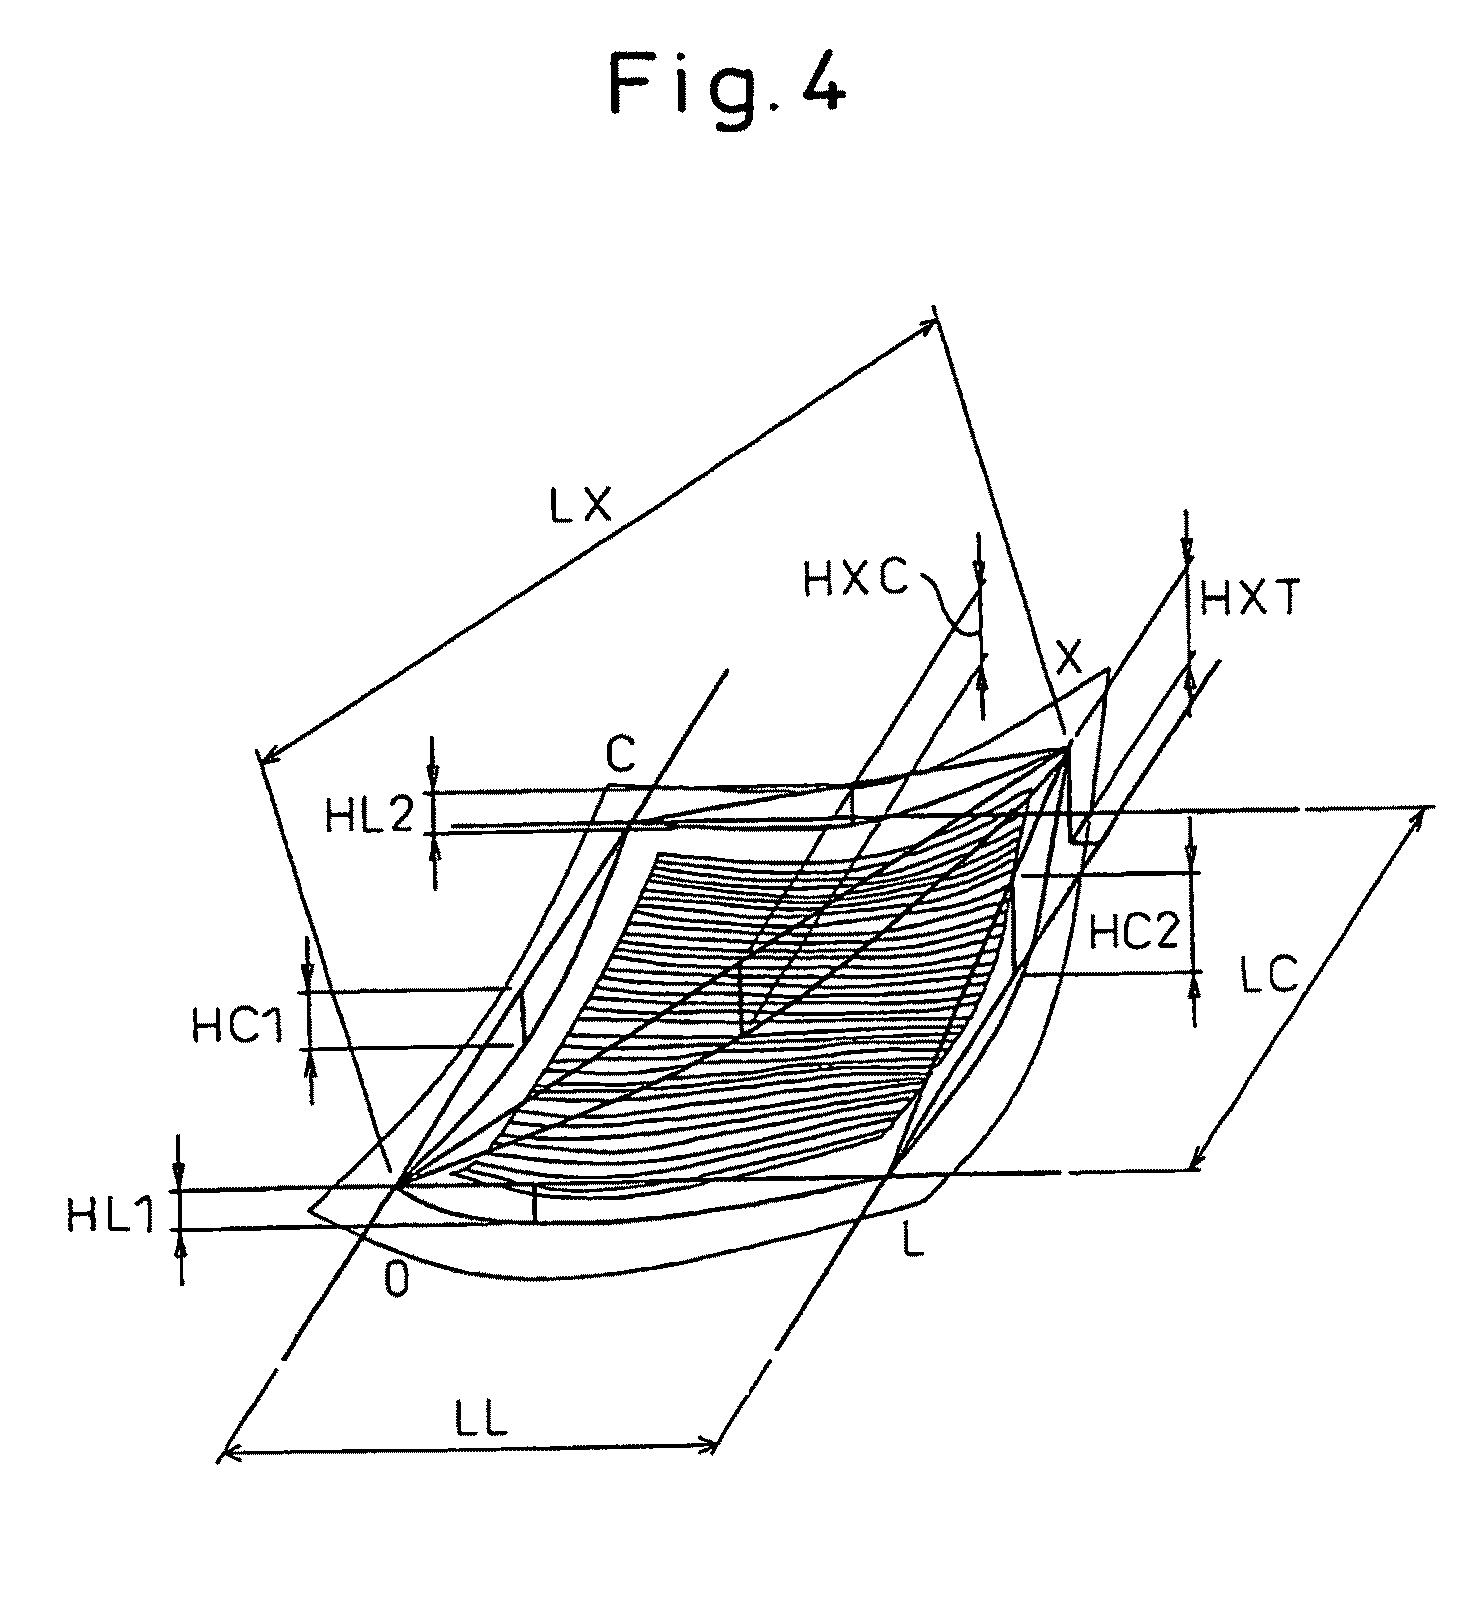 Stainless steel, titanium, or titanium alloy solid polymer fuel cell separator and its method of production and method of evaluation of warp and twist of separator